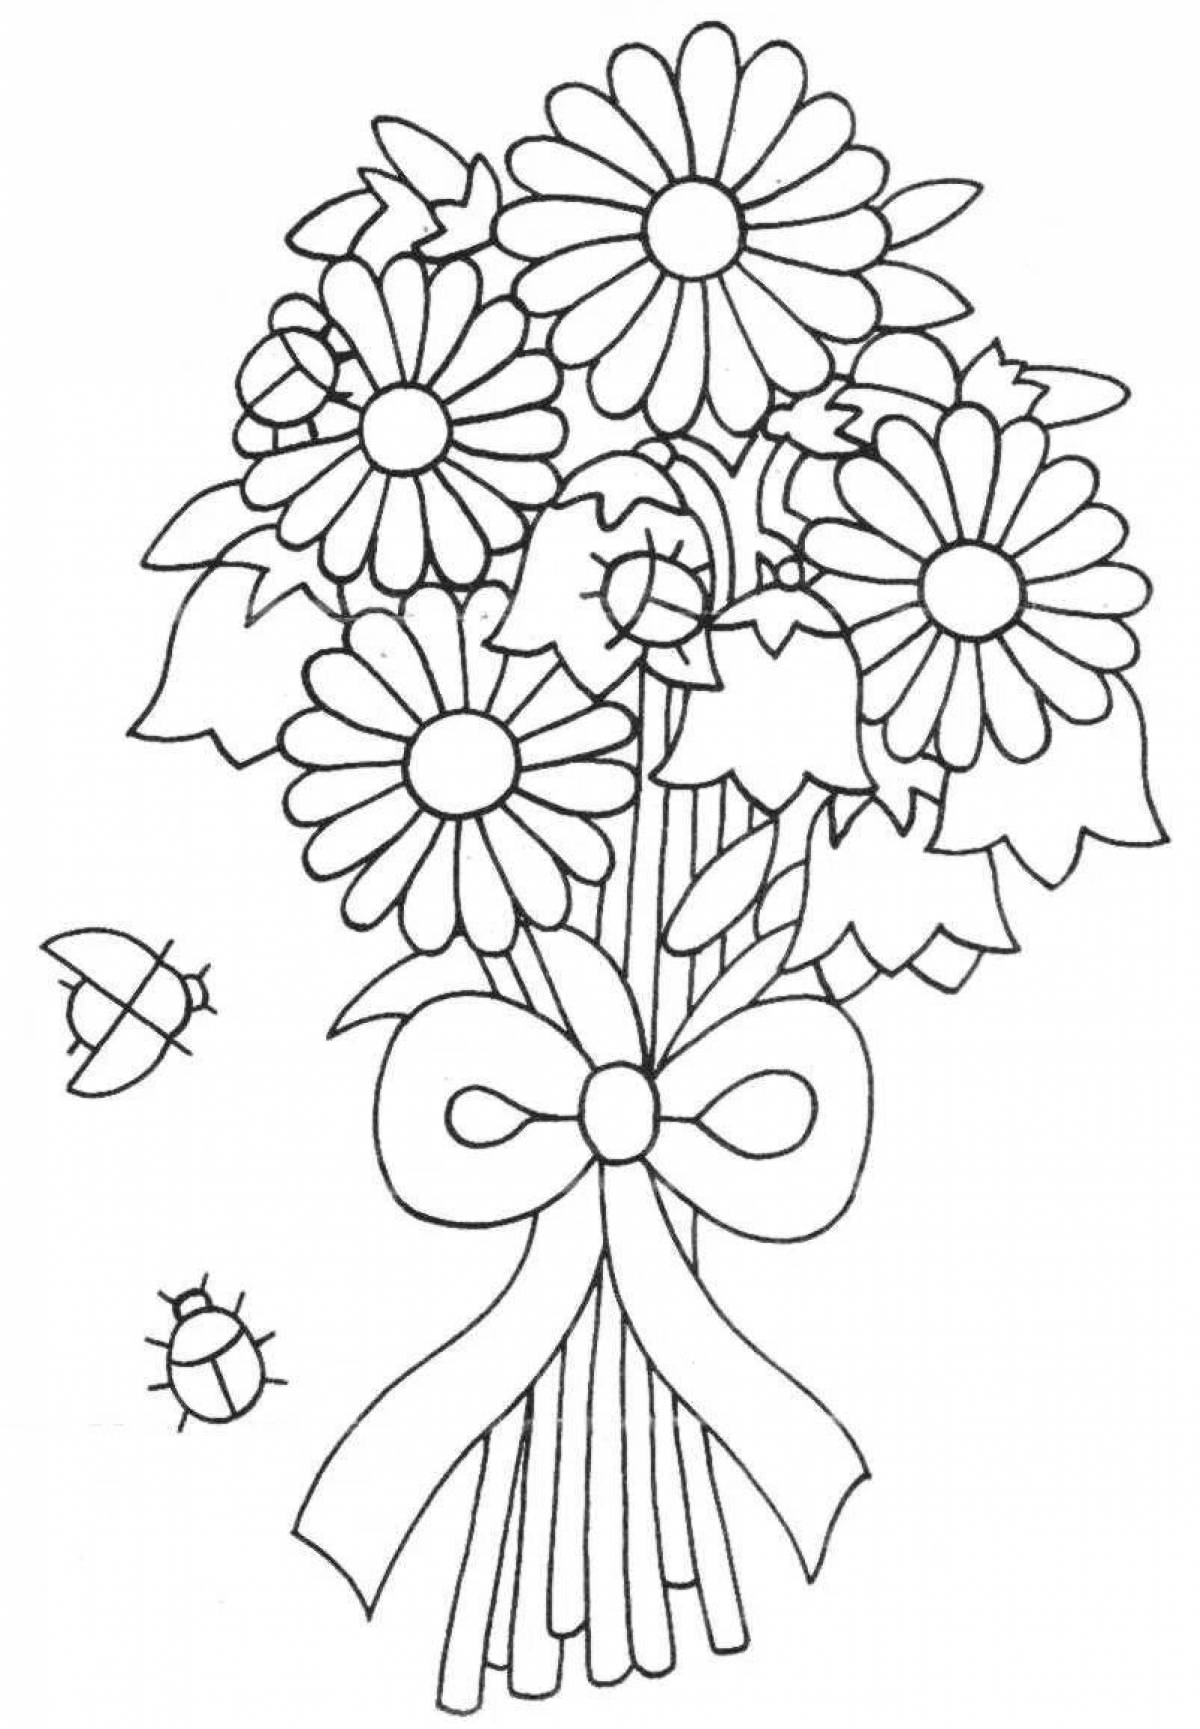 Coloring book shining bouquet of daisies